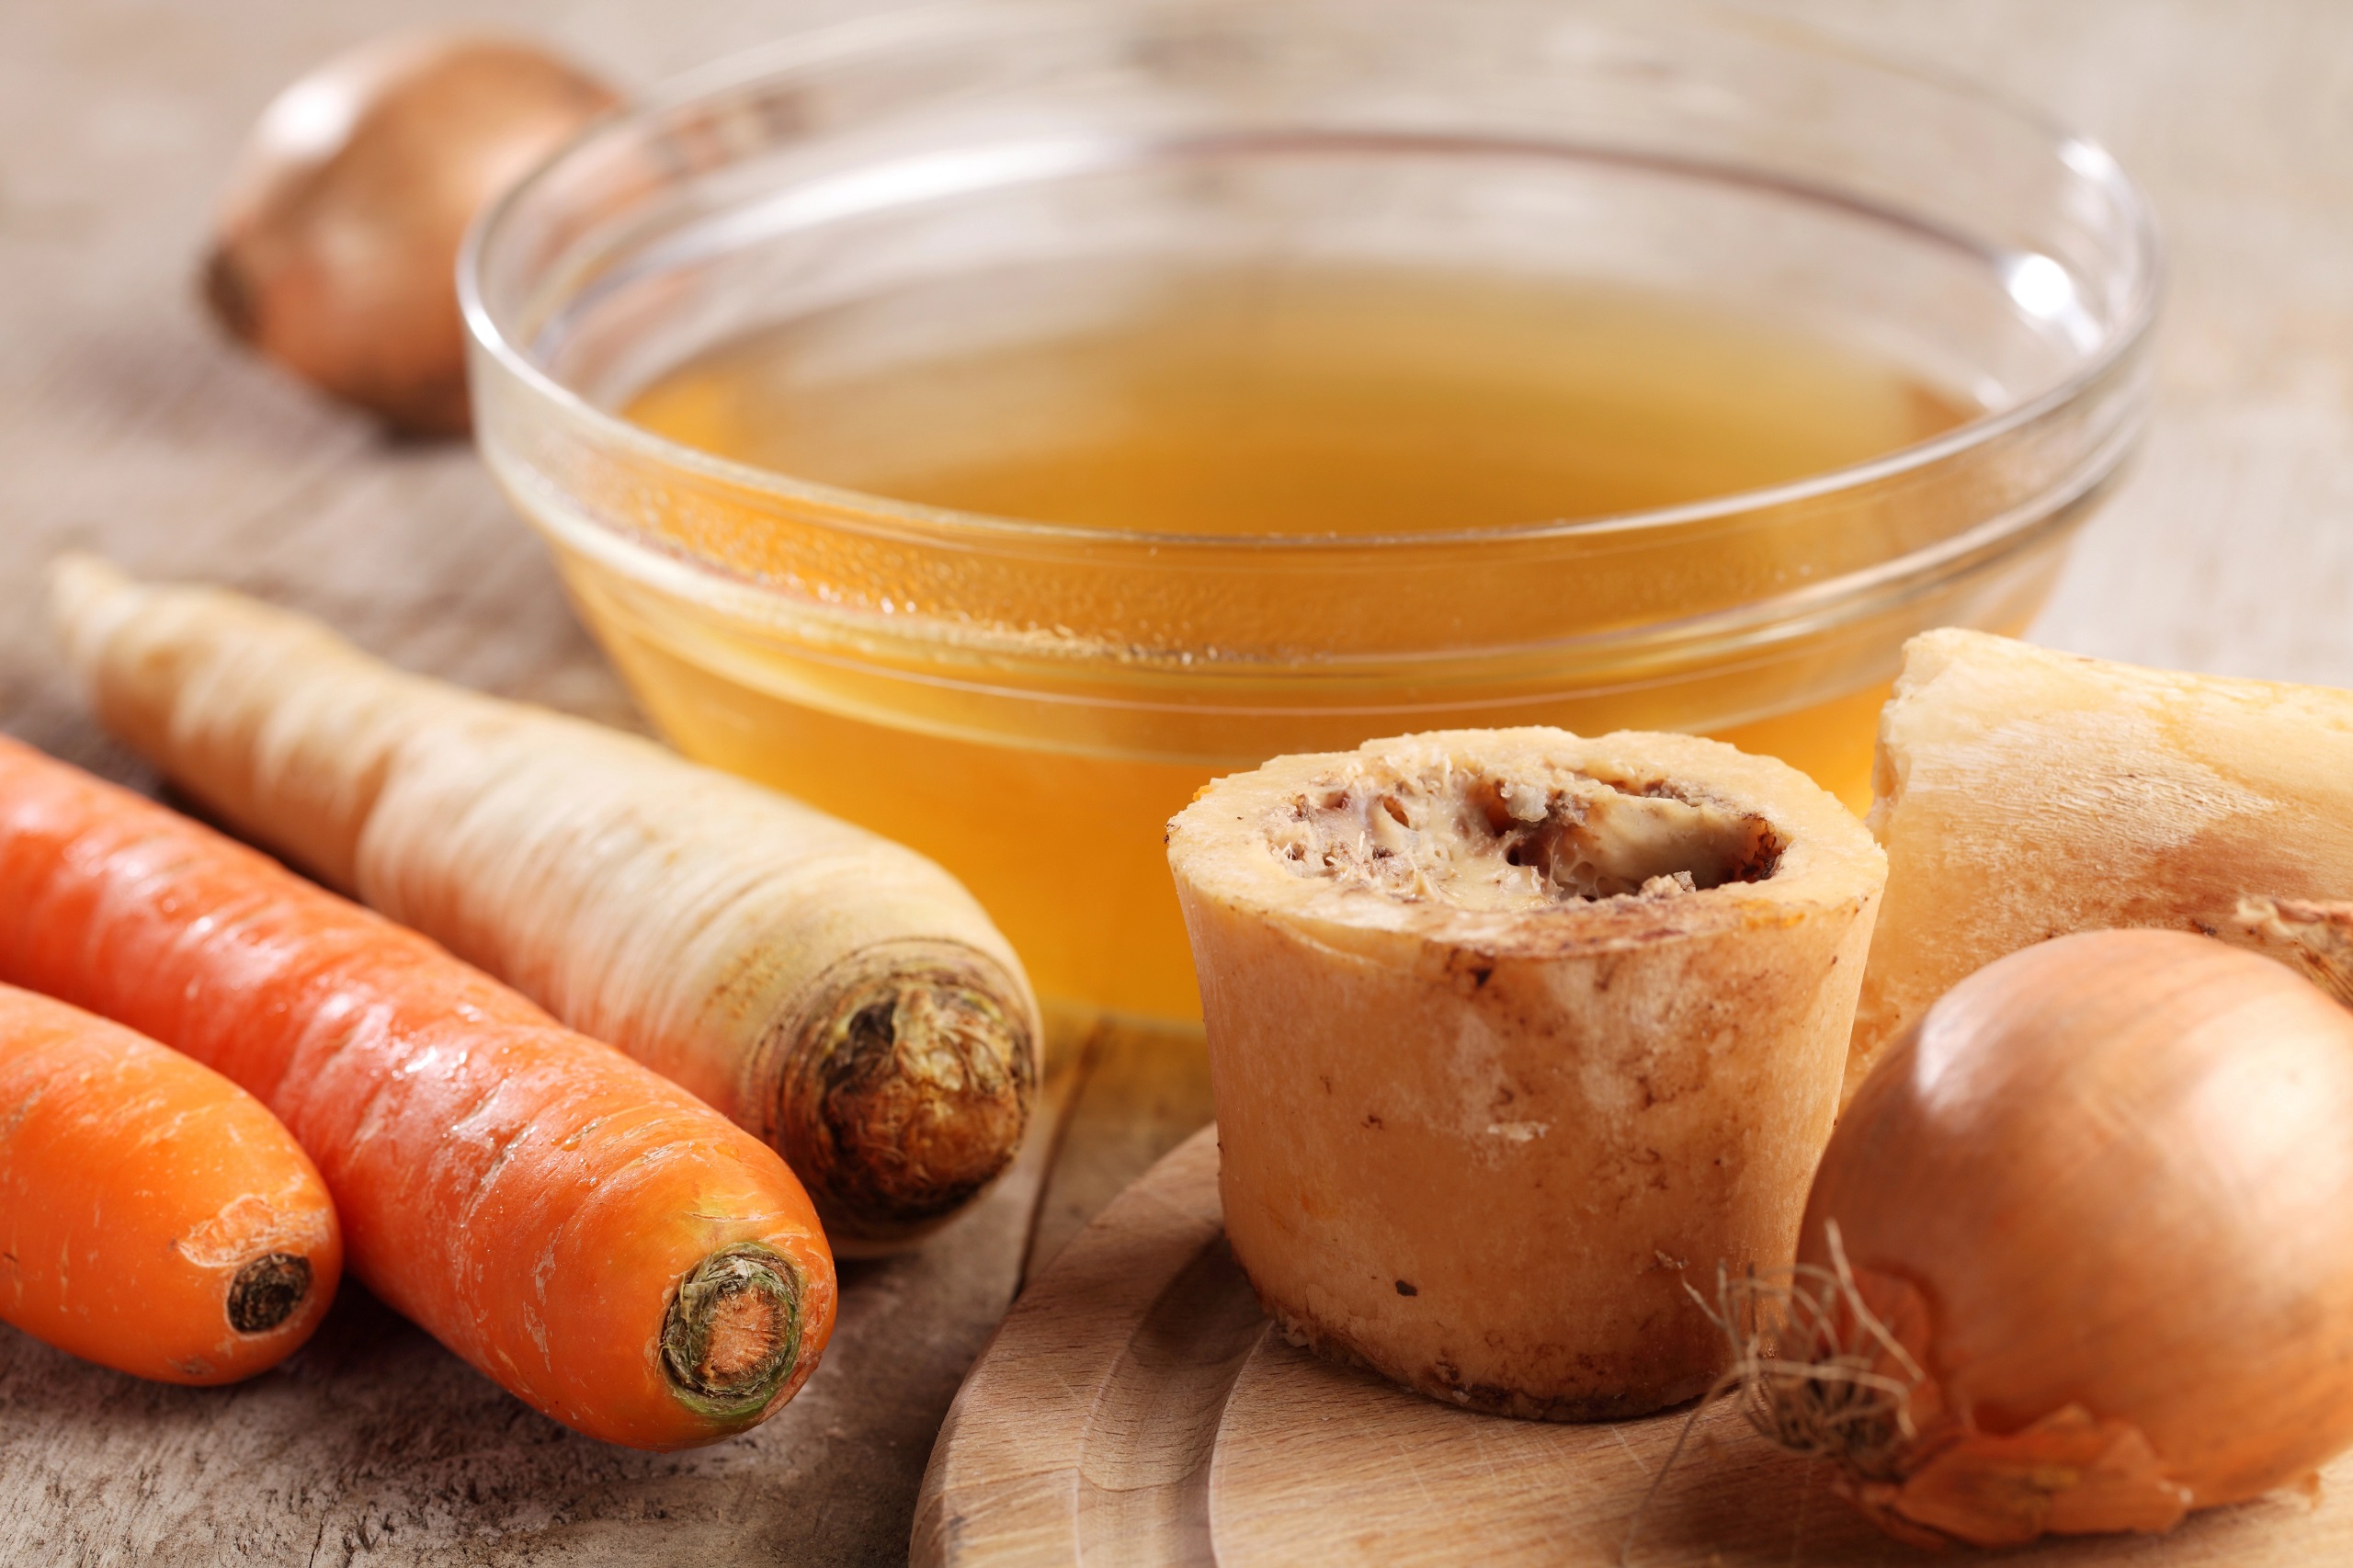 A small clear glass bowl filled with beef broth centered around a couple pieces of boiled bones with visible marrow next to orange and white carrots and yellow onions on a wooden surface.